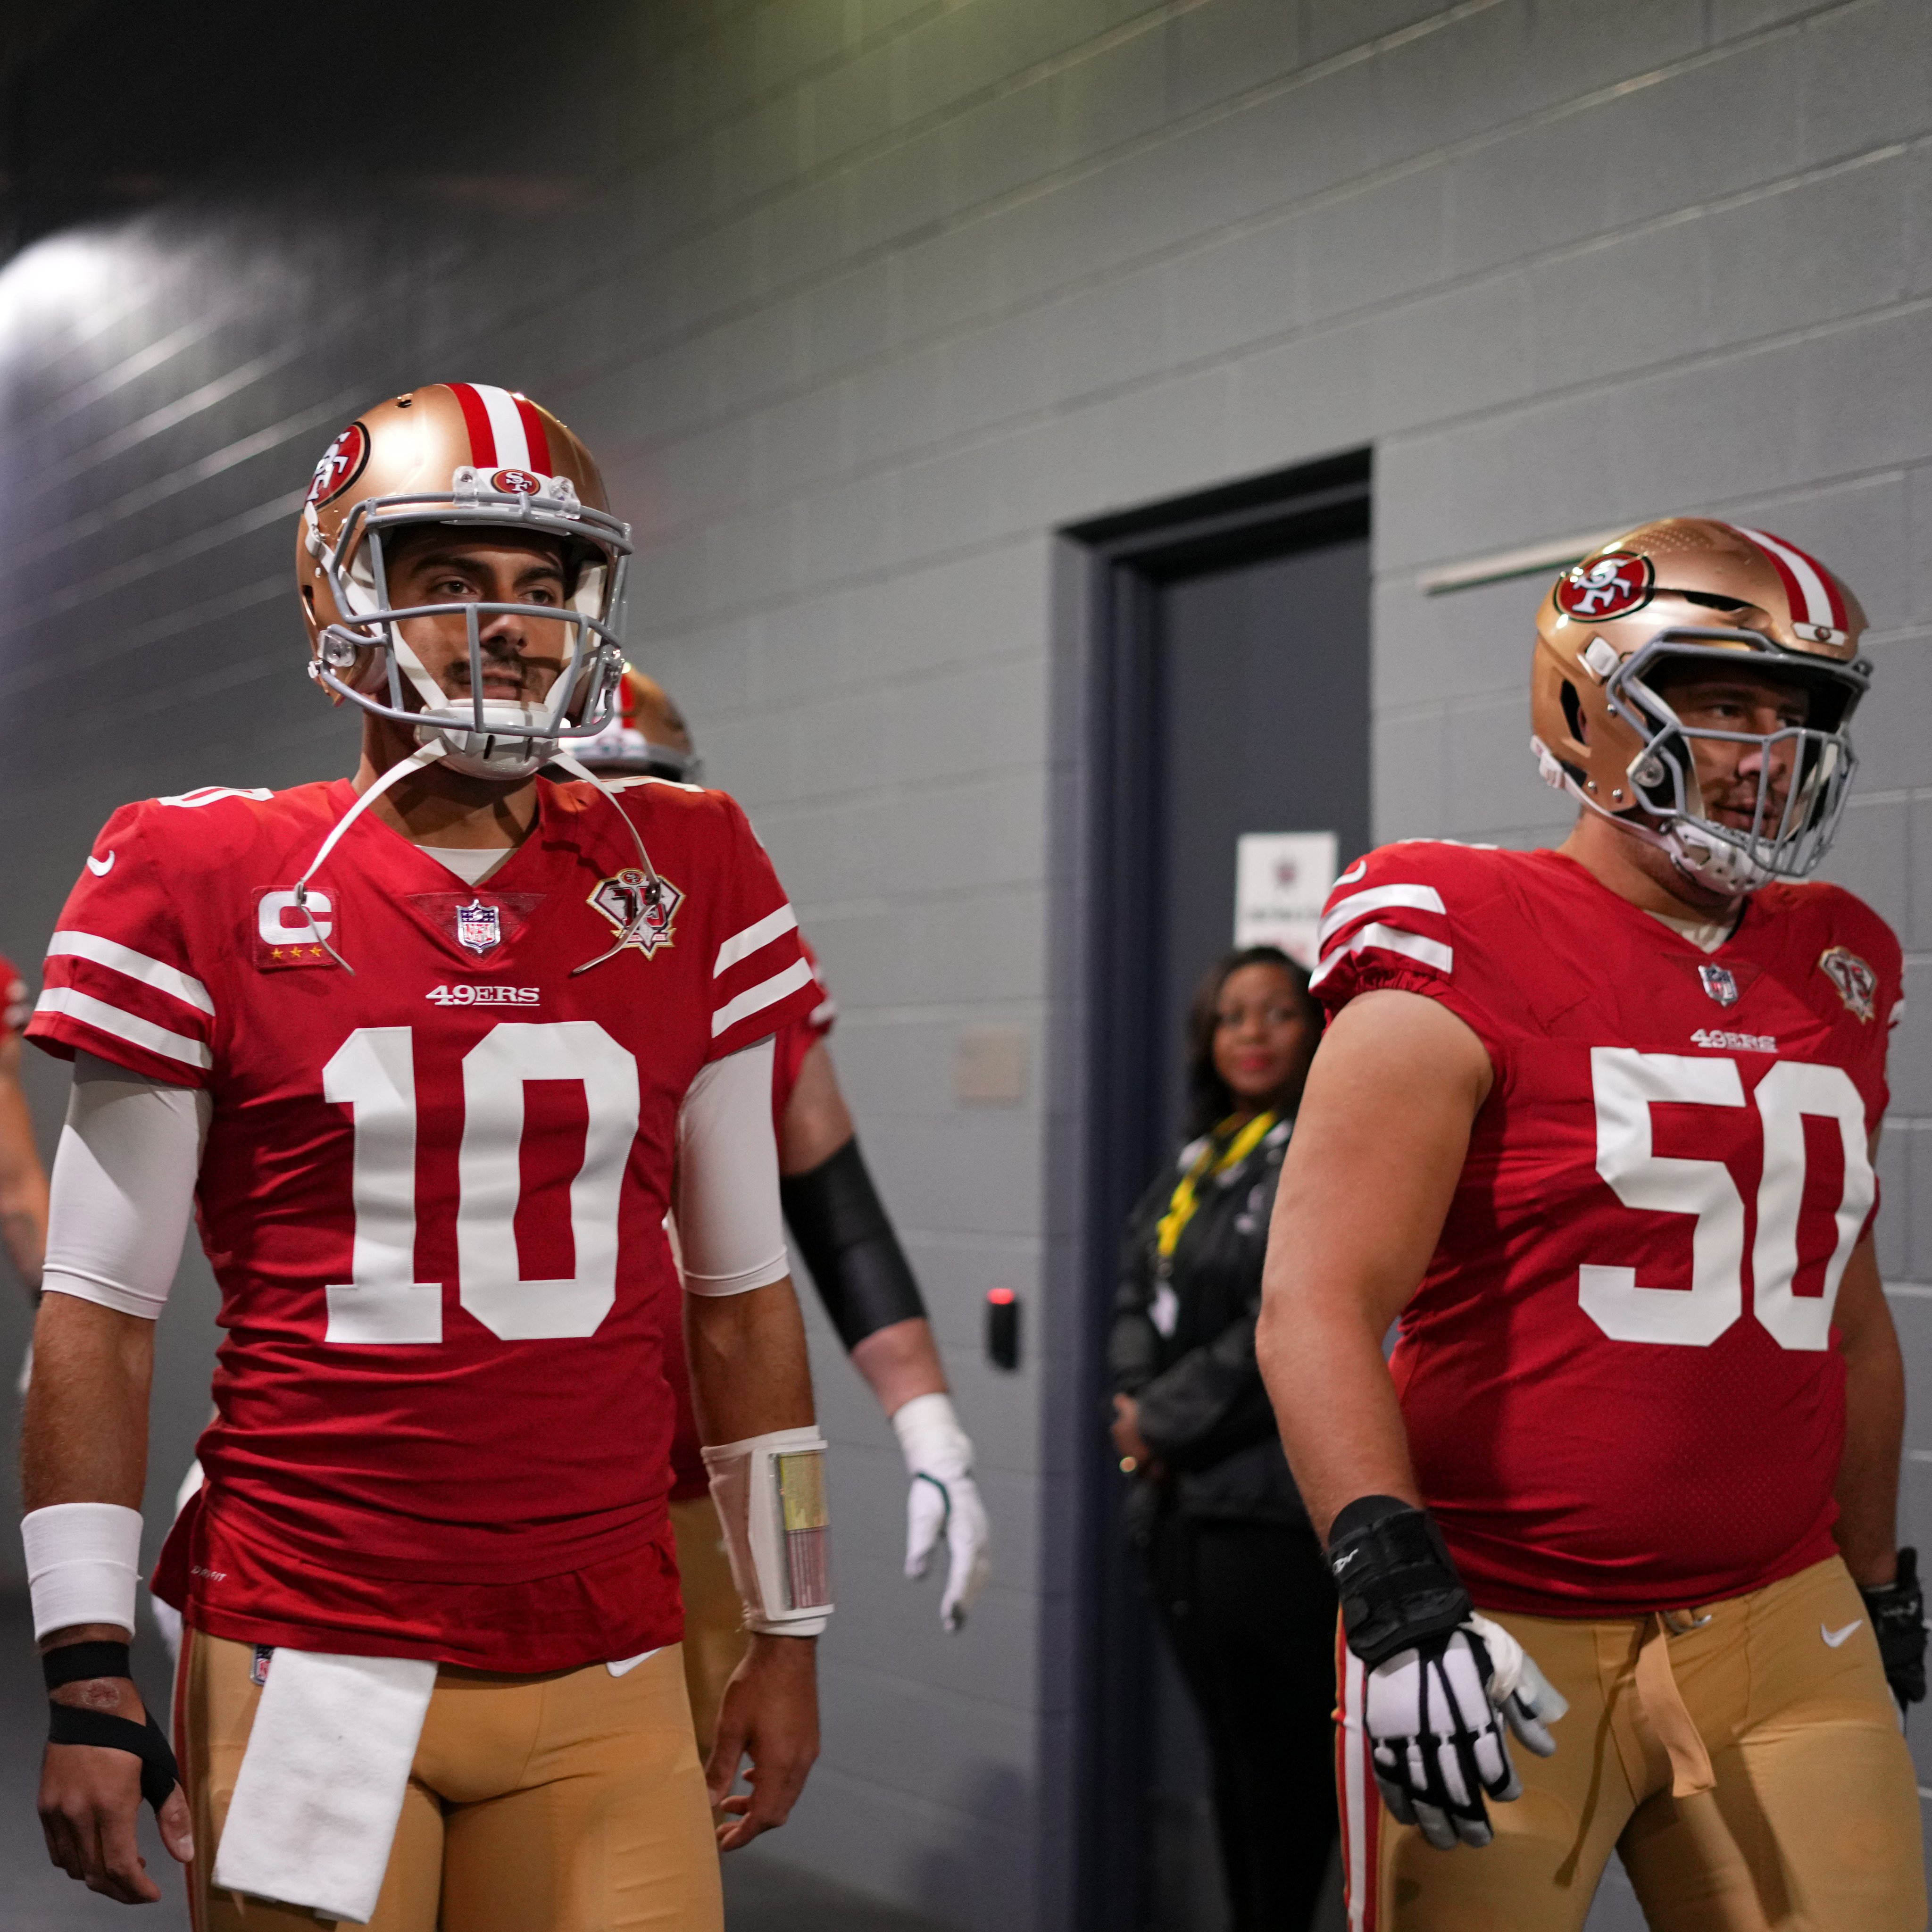 NFL on X: '49ers vs. Cowboys in the #NFLPlayoffs. Doesn't get much